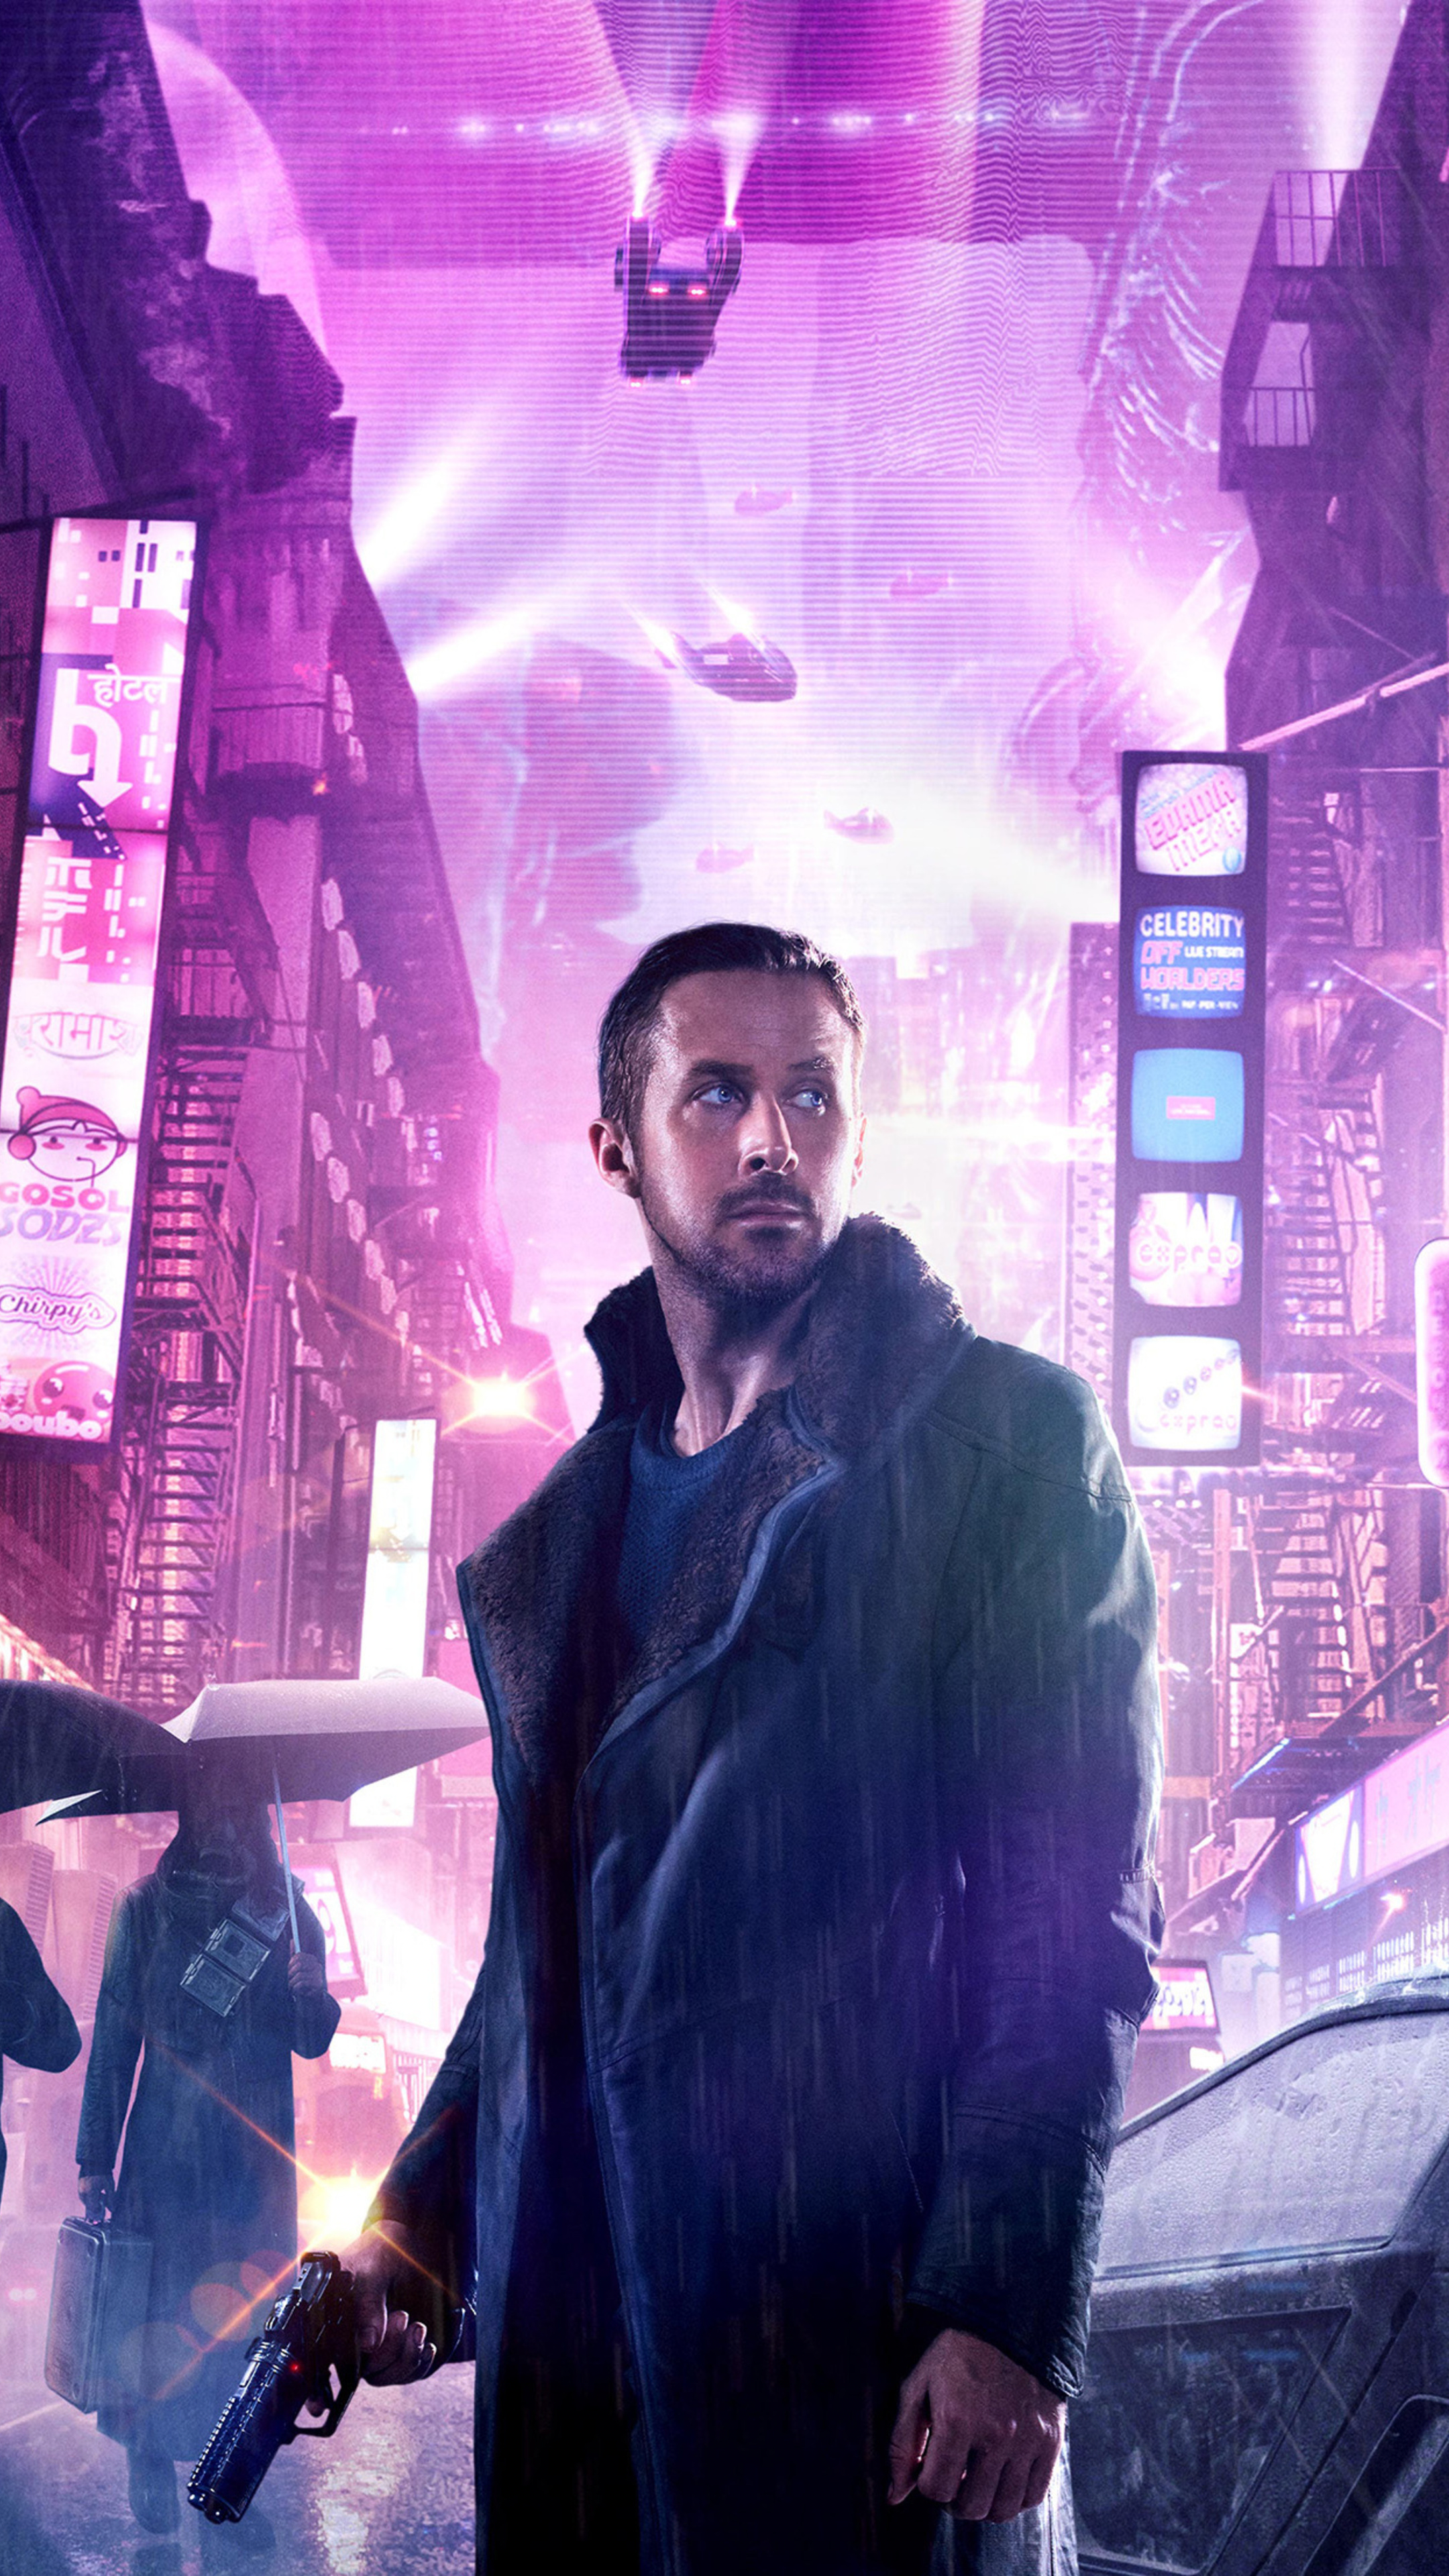 Blade Runner 2049 movie, 4K Sony Xperia, Futuristic technology, Captivating cinematography, 2160x3840 4K Phone